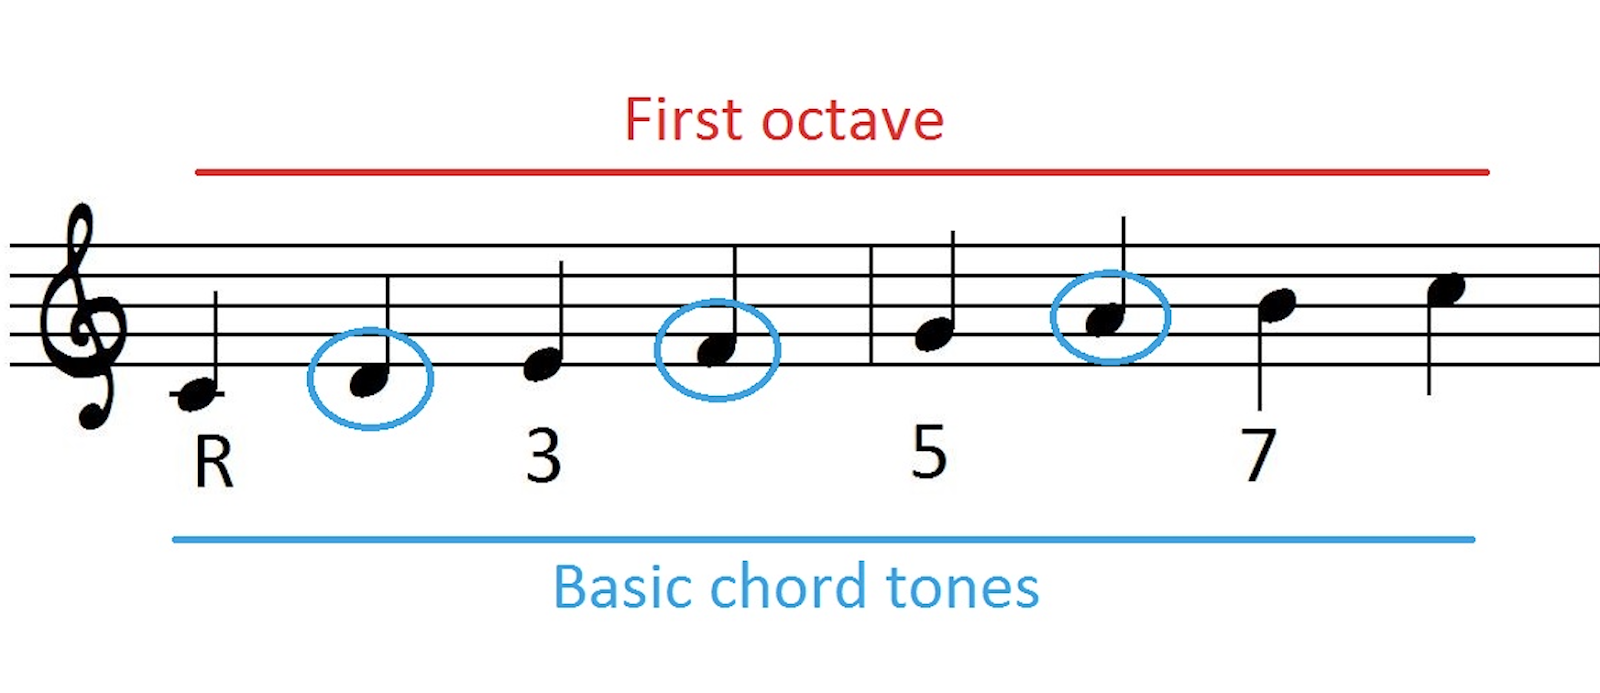 C major scale in one octave outlining chord tones: Root, 3rd, 5th, and 7th.